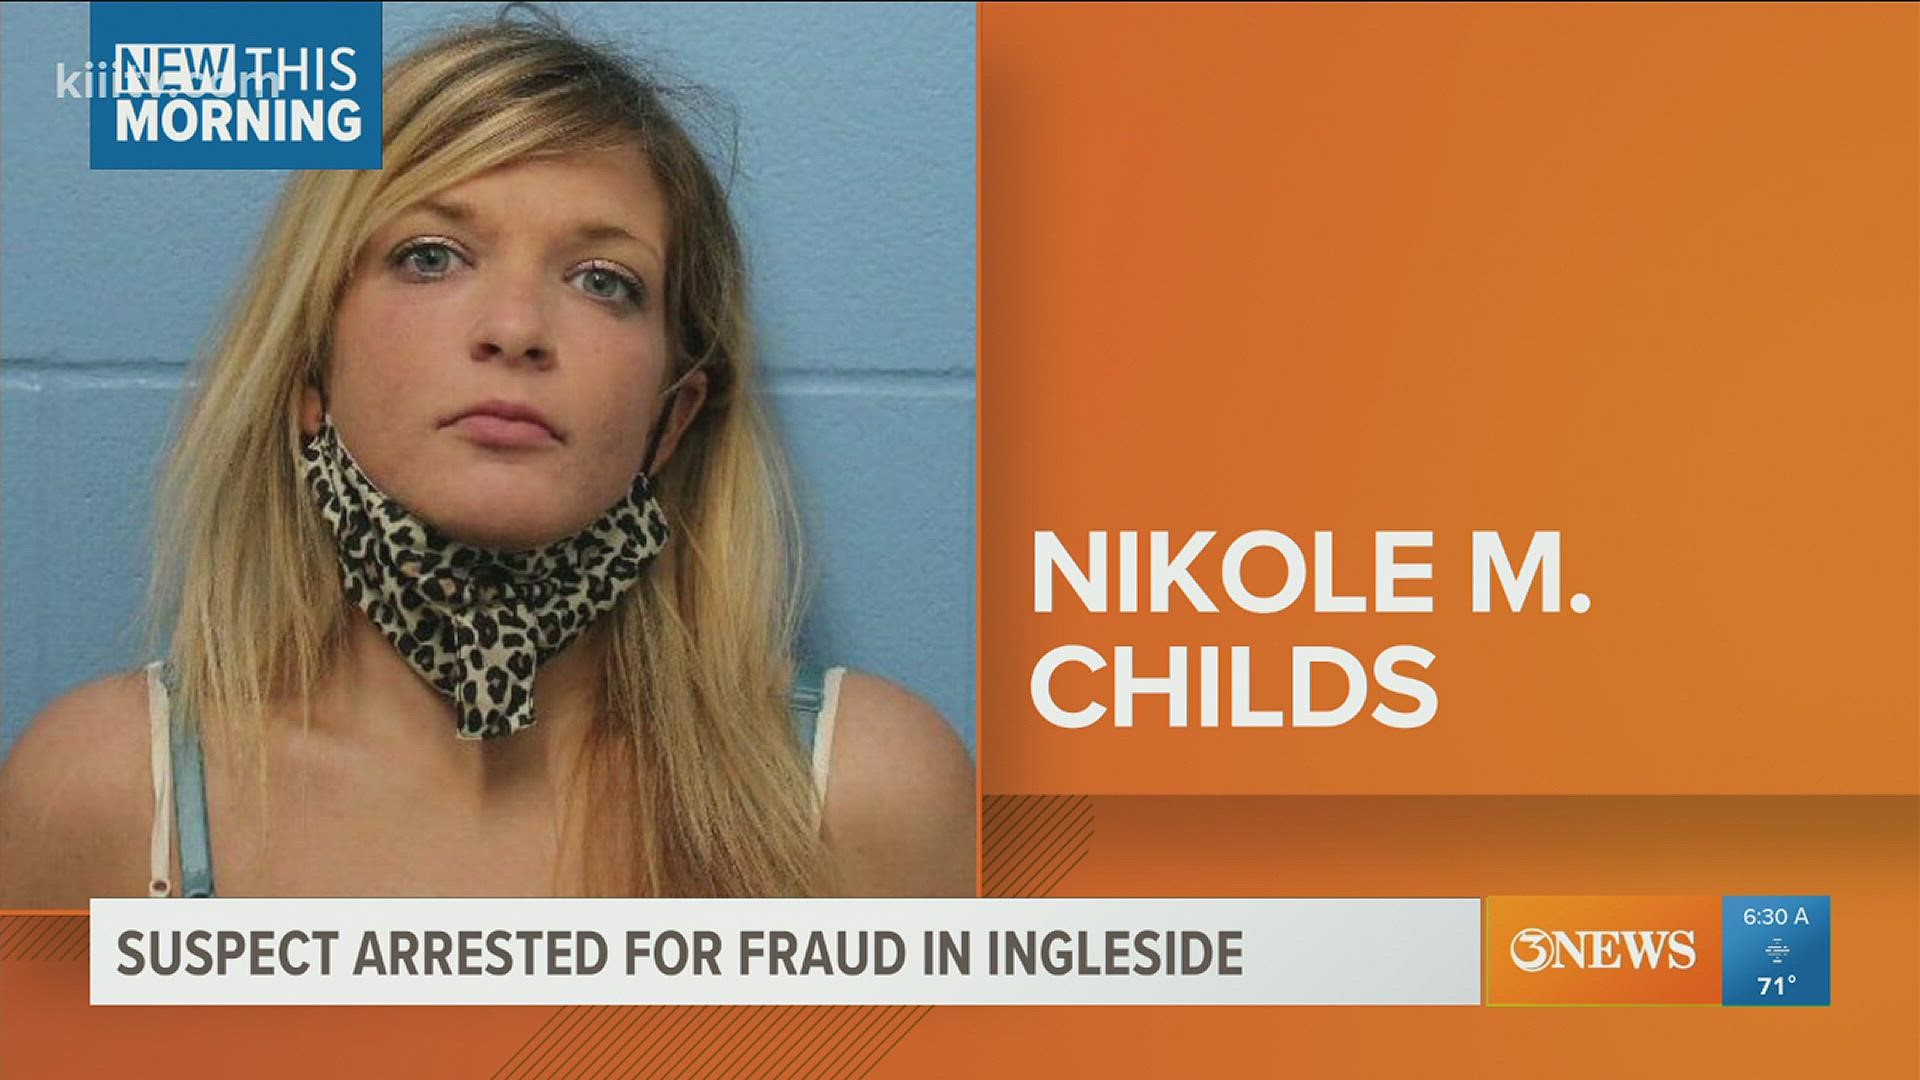 Nikole M. Childs has been arrested on multiple counts of fraud.